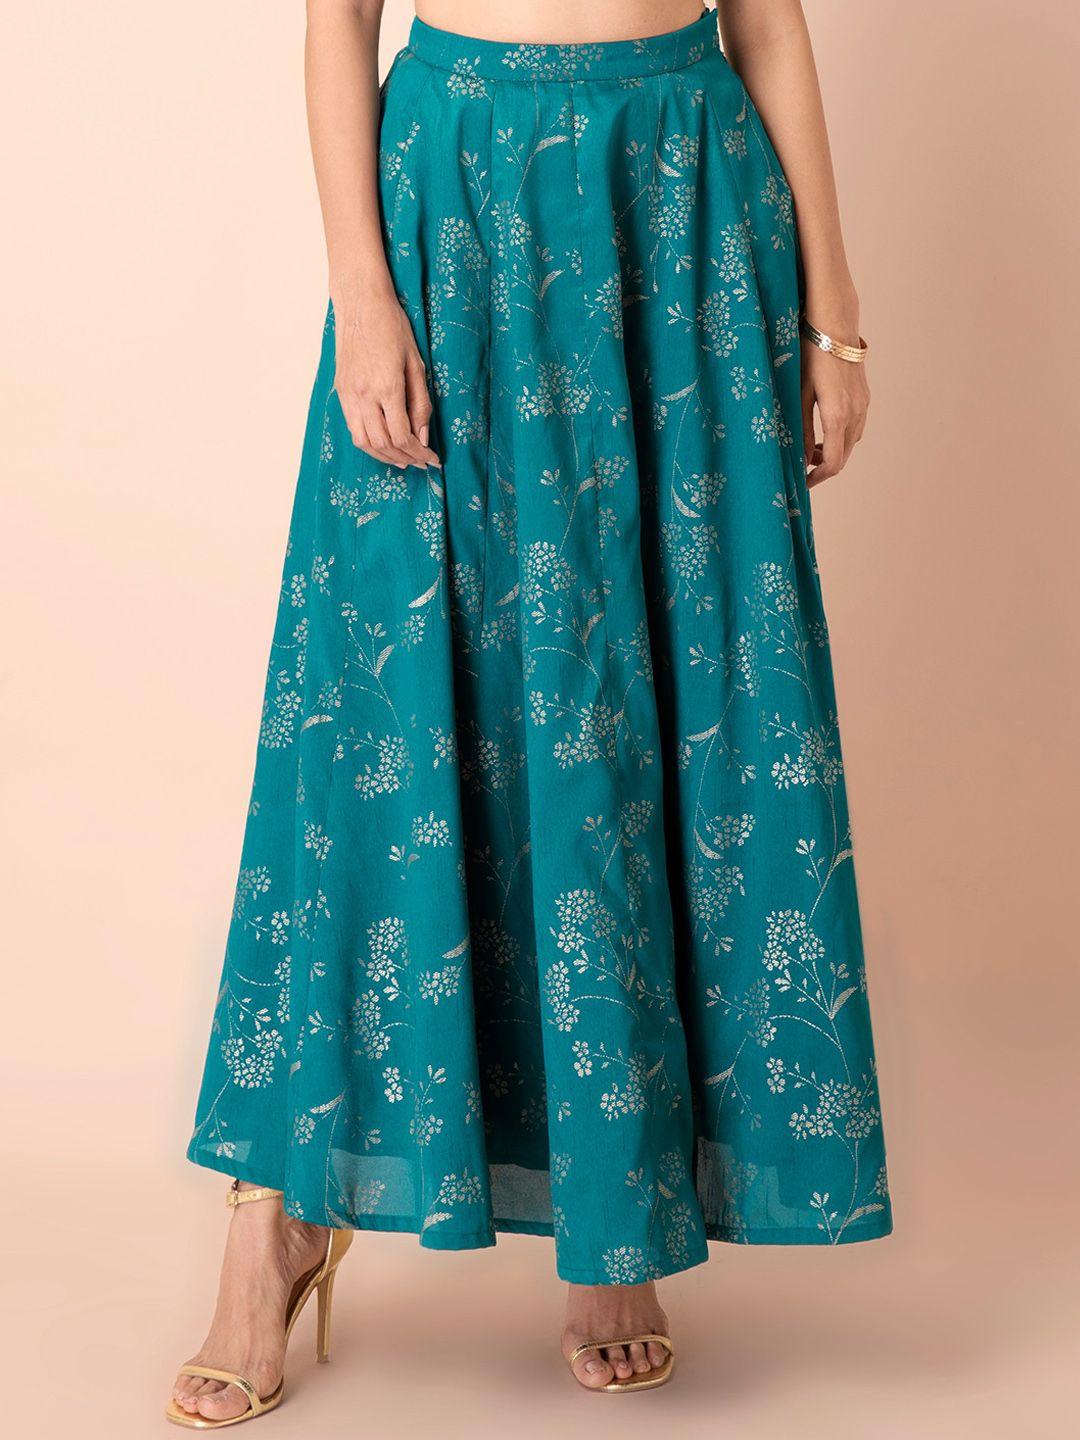 indya-women-teal-blue-&-silver-coloured-foil-printed-flared-maxi-skirt